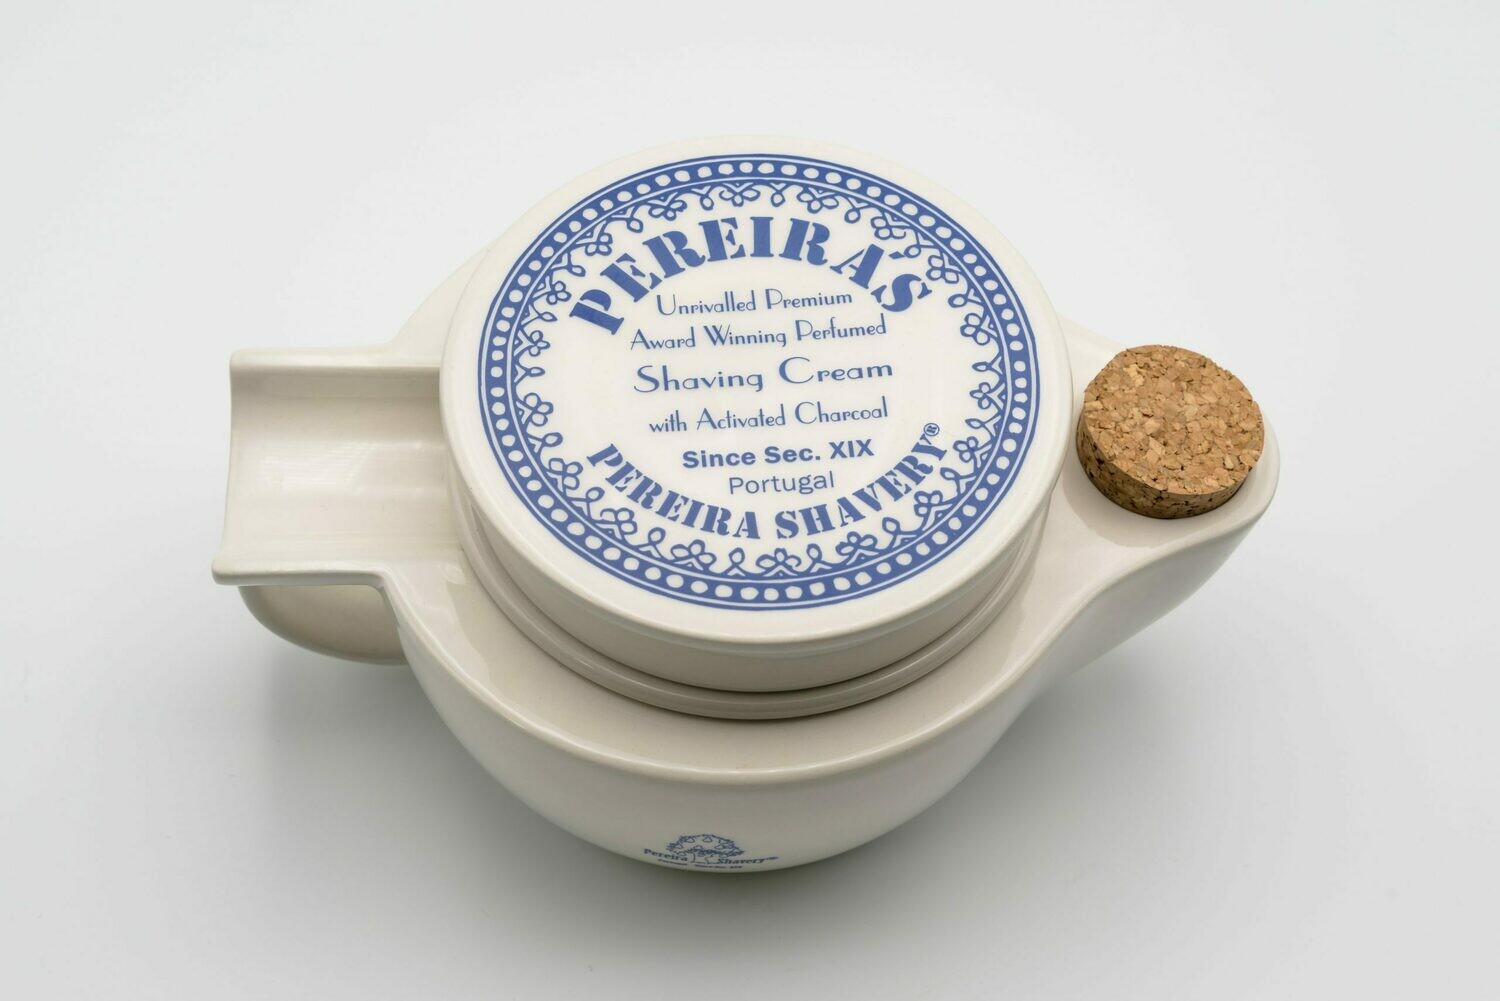 Pereira Shavery Ceramic Shaving Scuttle Bowl - Keep Lather Always Warm Or Ice Cold With A Large Deep Size Bowl With Ribs For Frictions Handmade In Portugal. With or Without Soap Dish